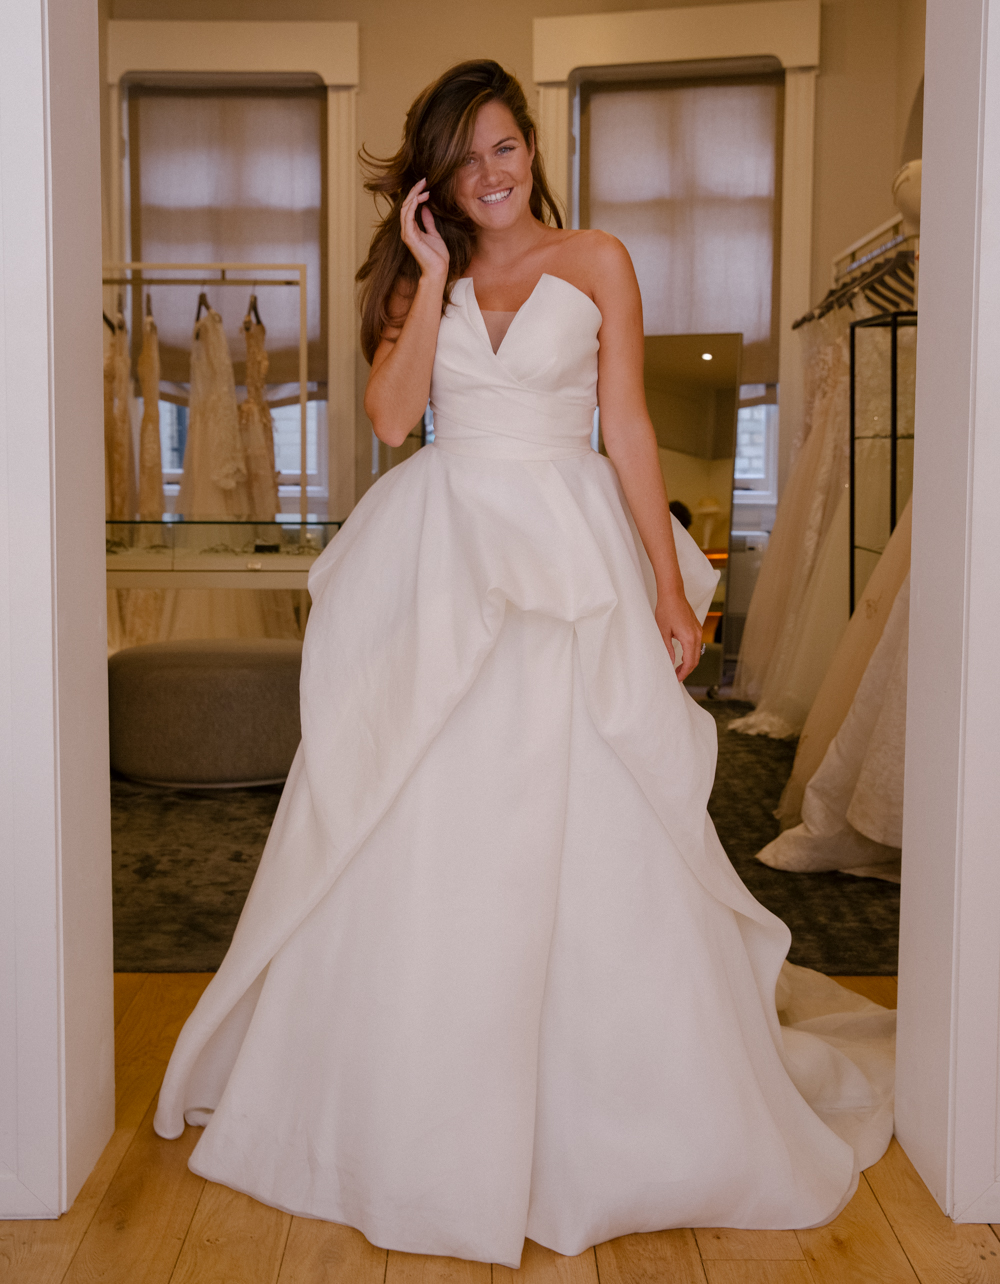 Top Wedding Dress Shopping Nyc of the decade Check it out now 